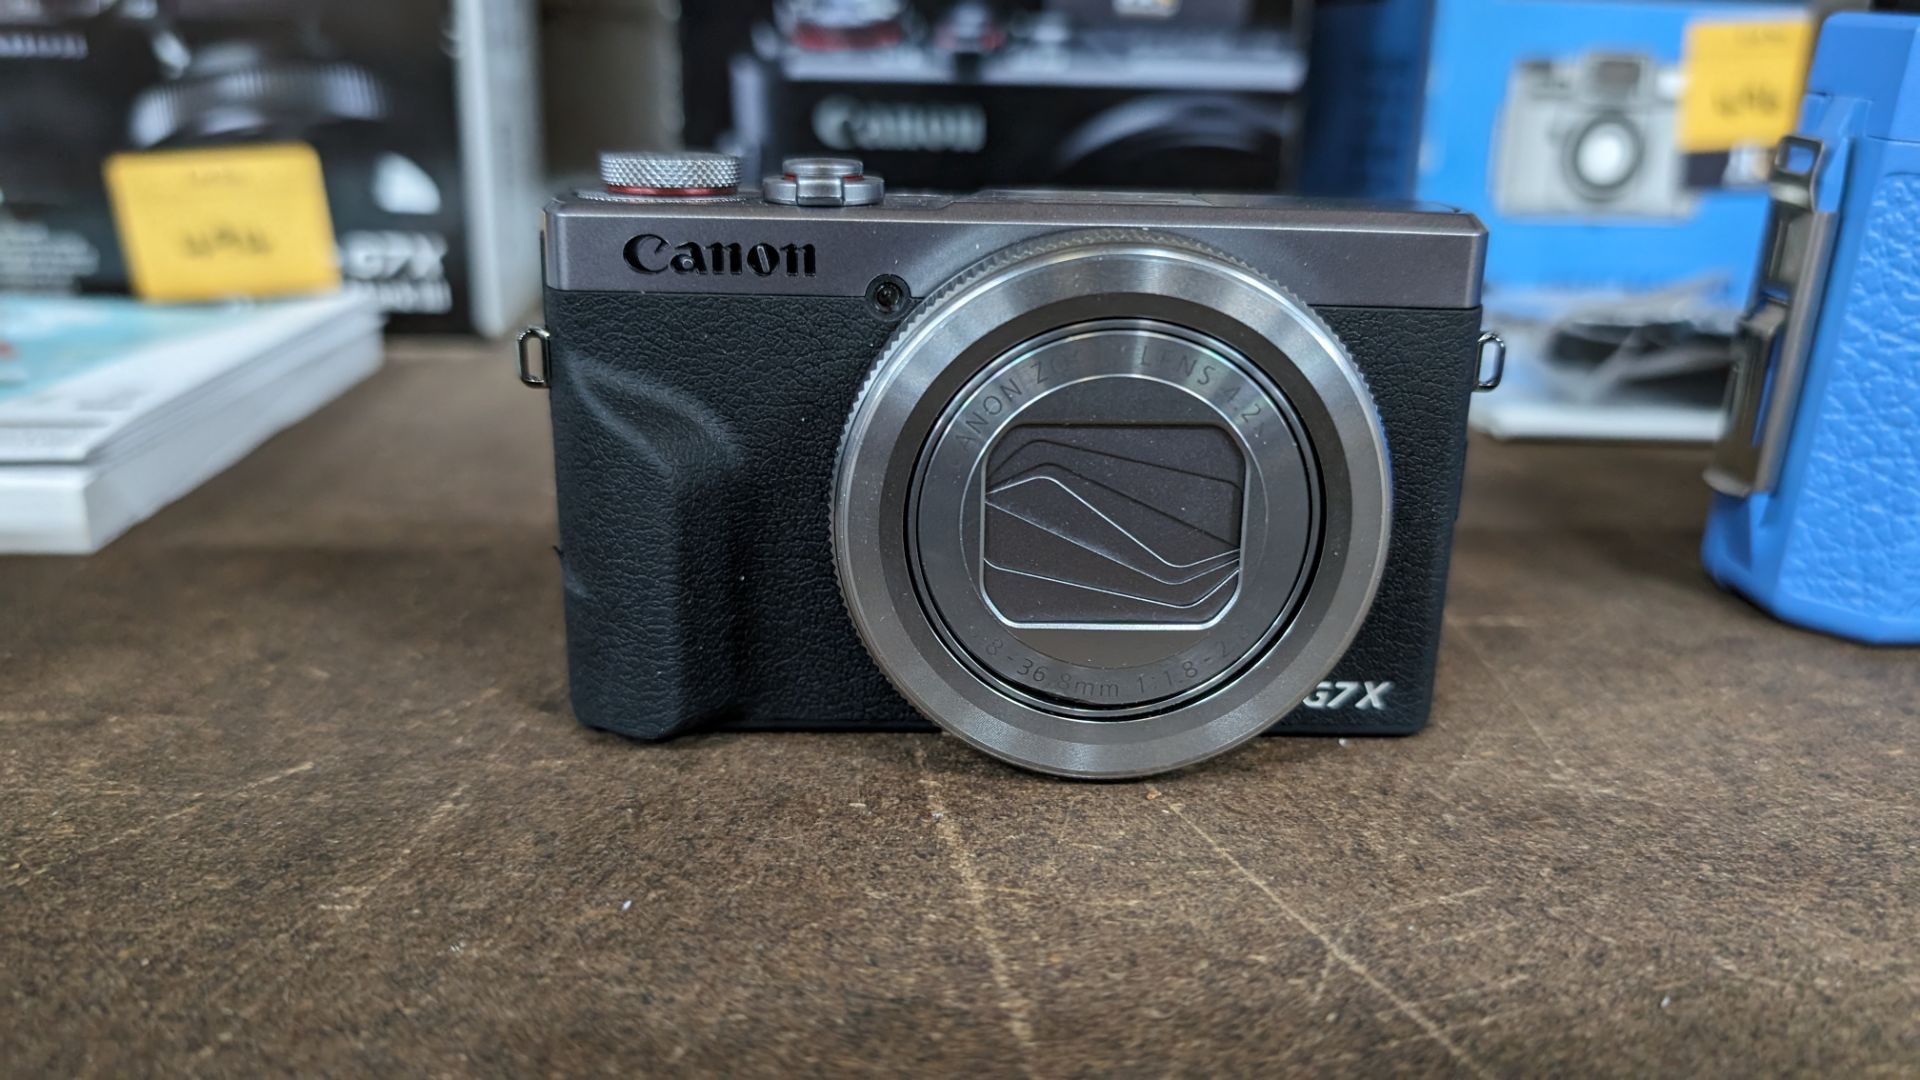 Canon PowerShot G7X Mark II camera, including battery and charger - Image 11 of 12